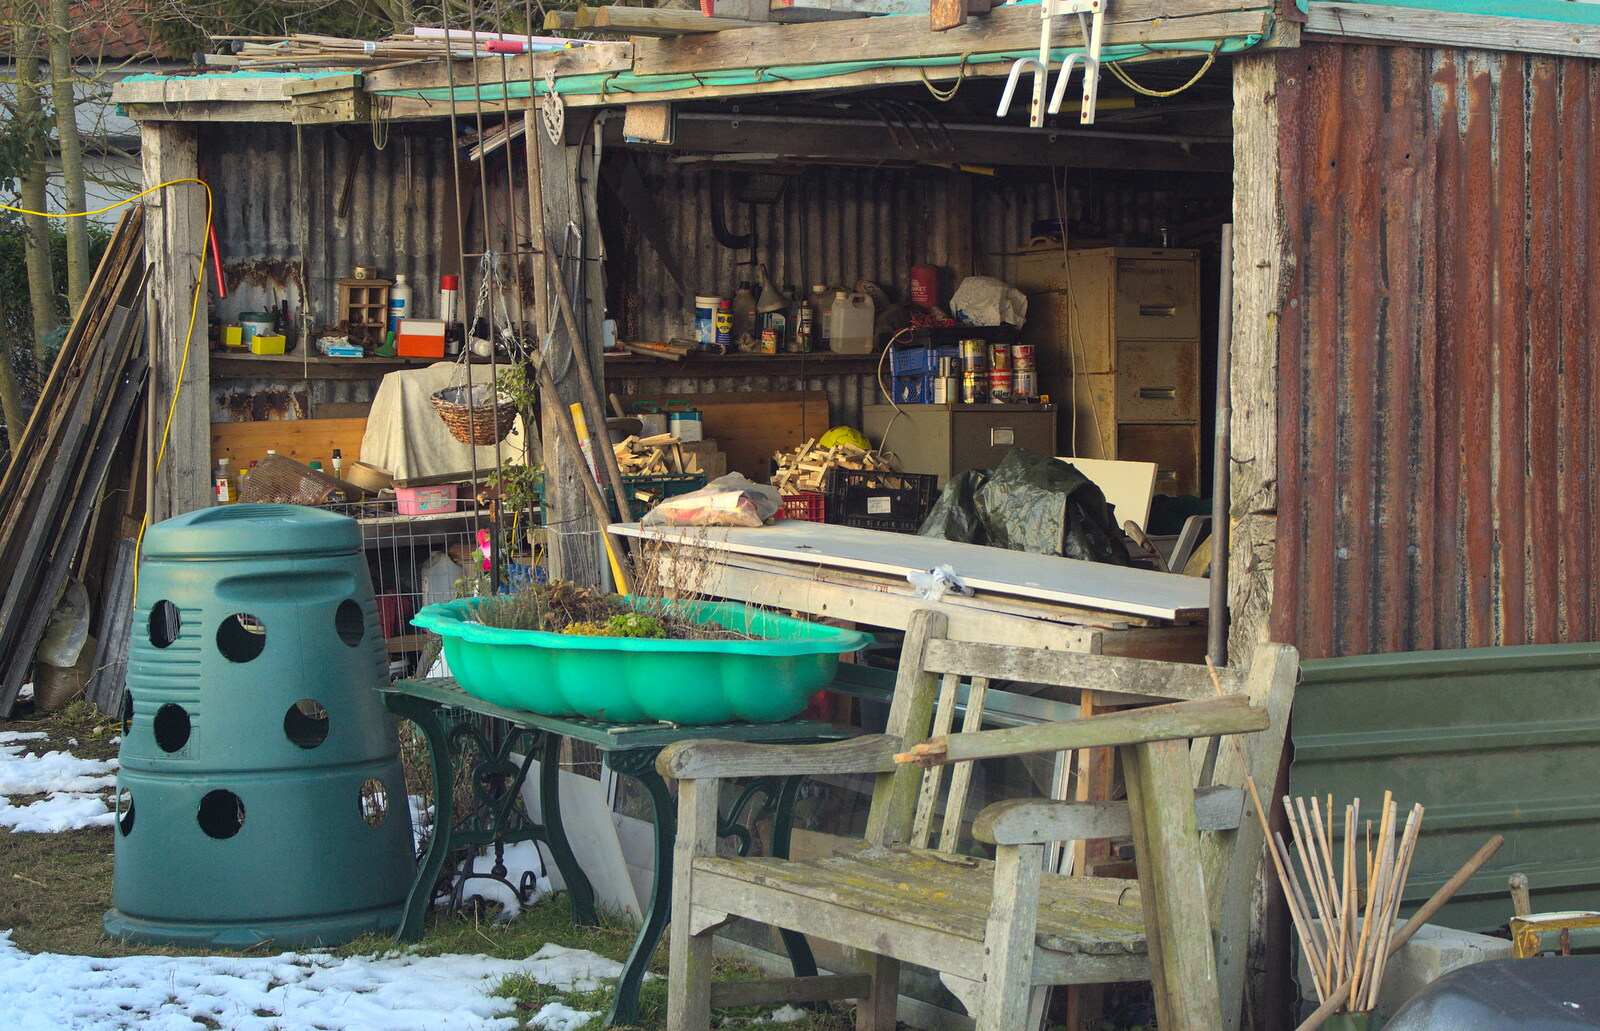 The late Syd's shed from Winter Walks with Sis and Matt, Brome and Thornham, Suffolk - 11th February 2012